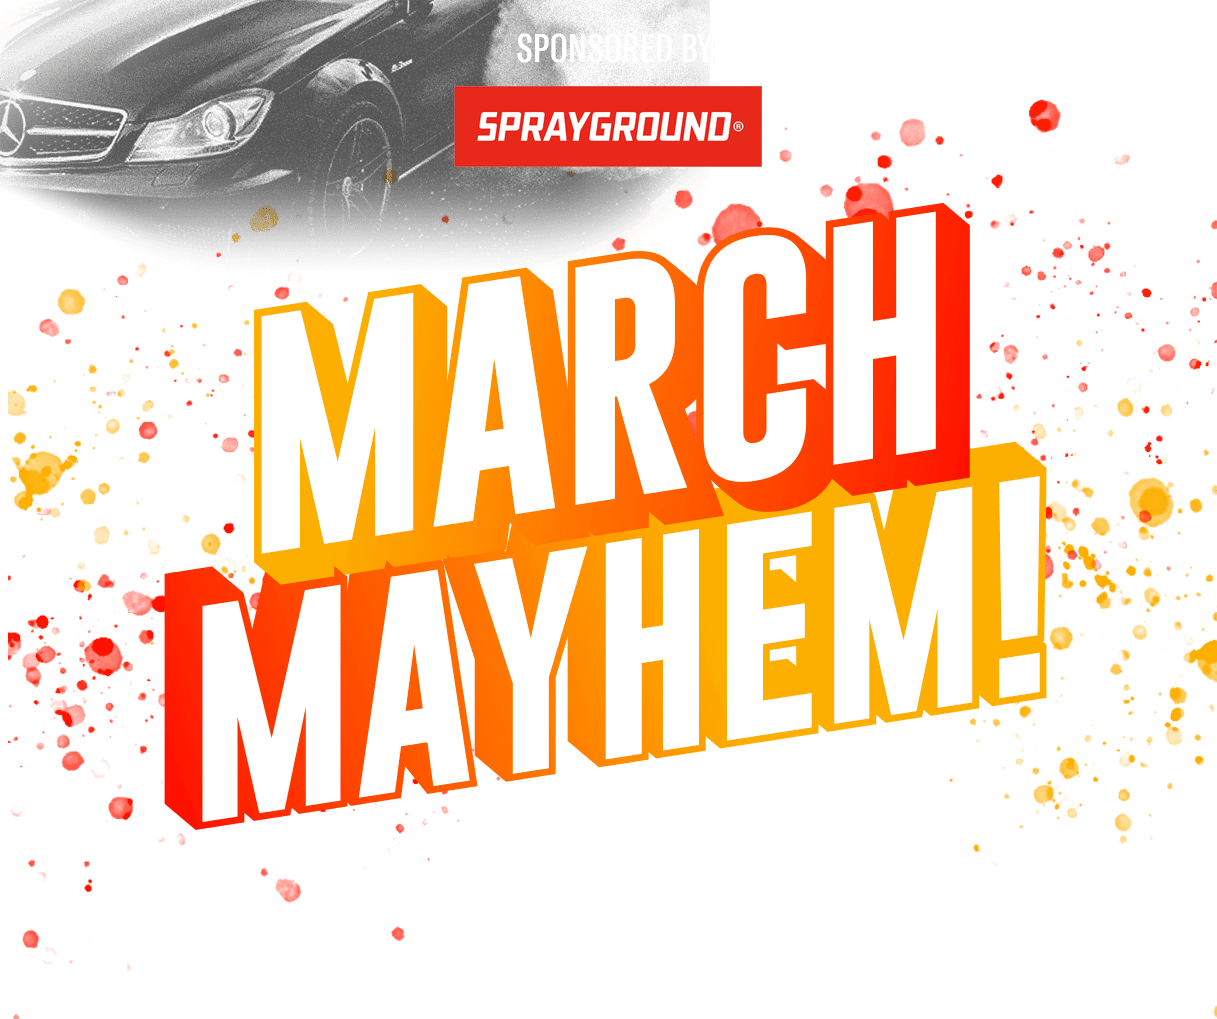 March Mayhem March 27th 12 PM to 5 PM Stage Motorsport